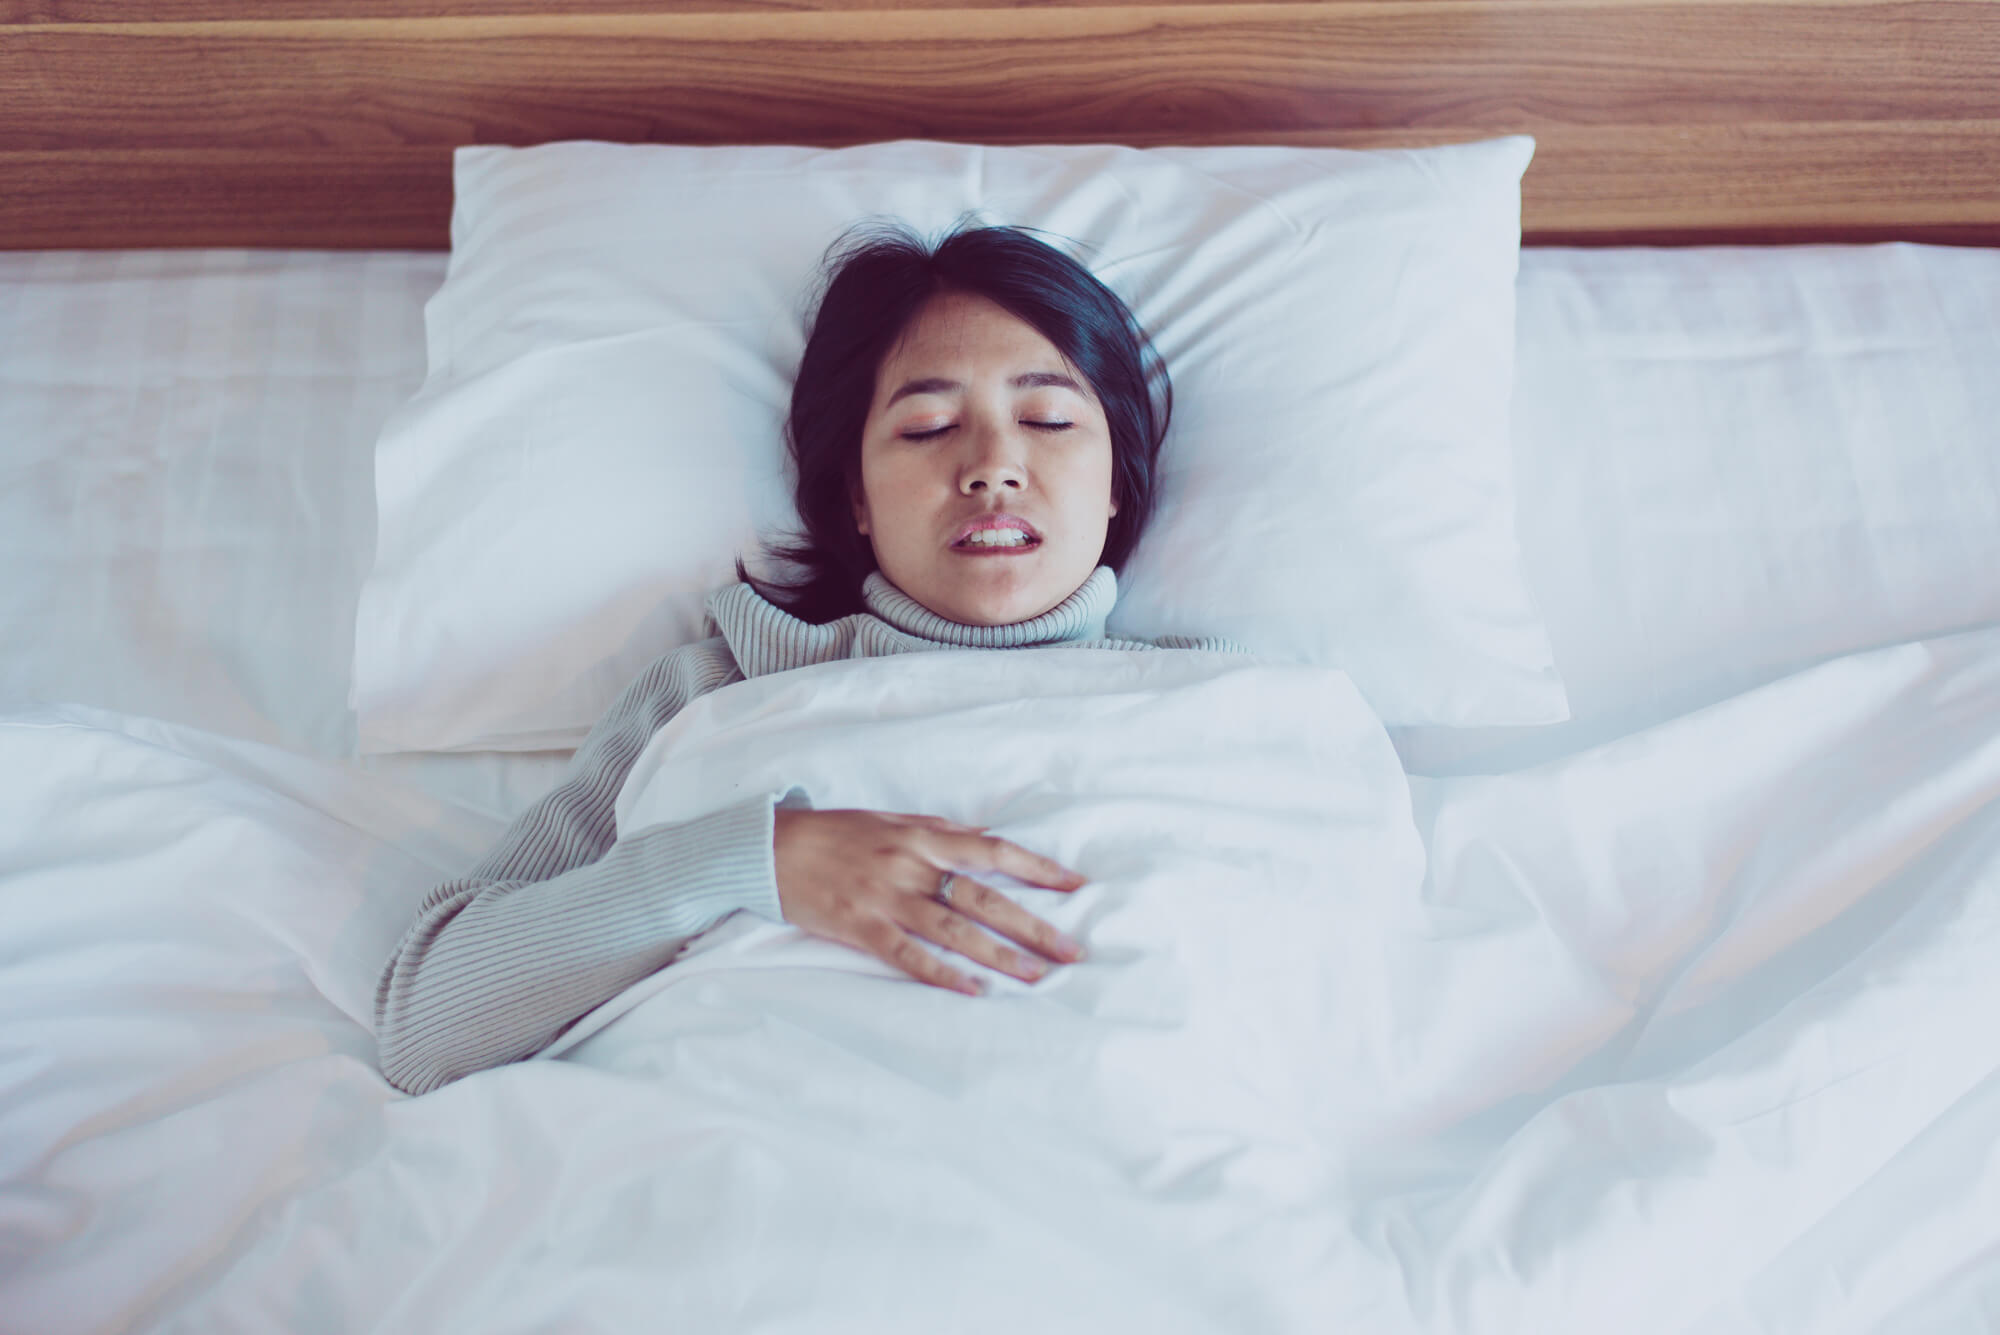 woman waking up with pain after grinding teeth during sleep